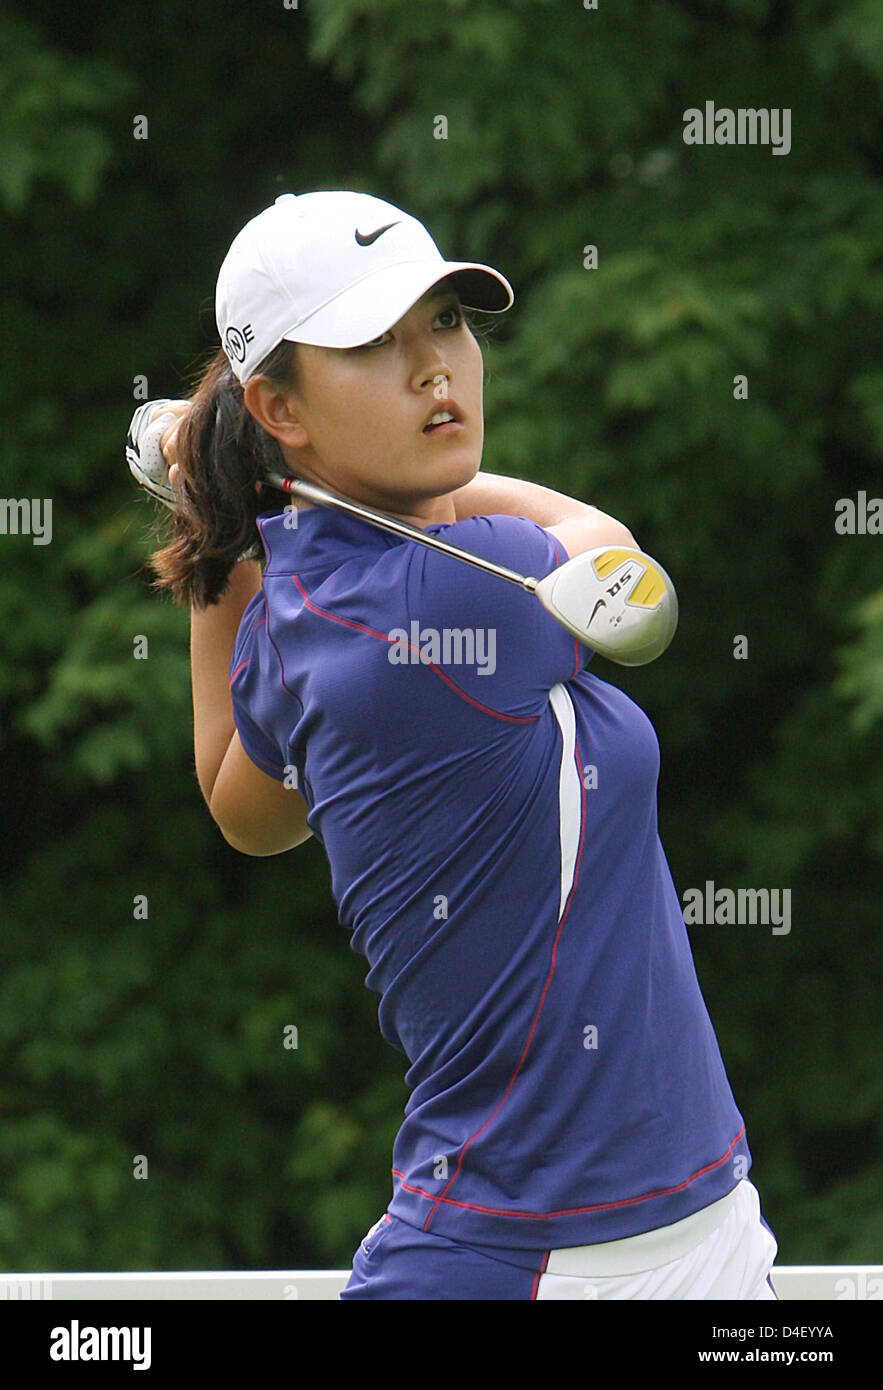 US professional golfer of Korean origin, Michelle Wie, pictured in action on golf course 'Gut Haeusern' near Markt Indersdorf, Germany, 28 May 2008. 121 professional golfers and seven amateurs will participate in the 'HypoVereinsbank Ladies German Open 2008' being held from 29 May until 01 June. The top 60 players will compete in the finals on the weekend. Photo: URSULA DUEREN Stock Photo